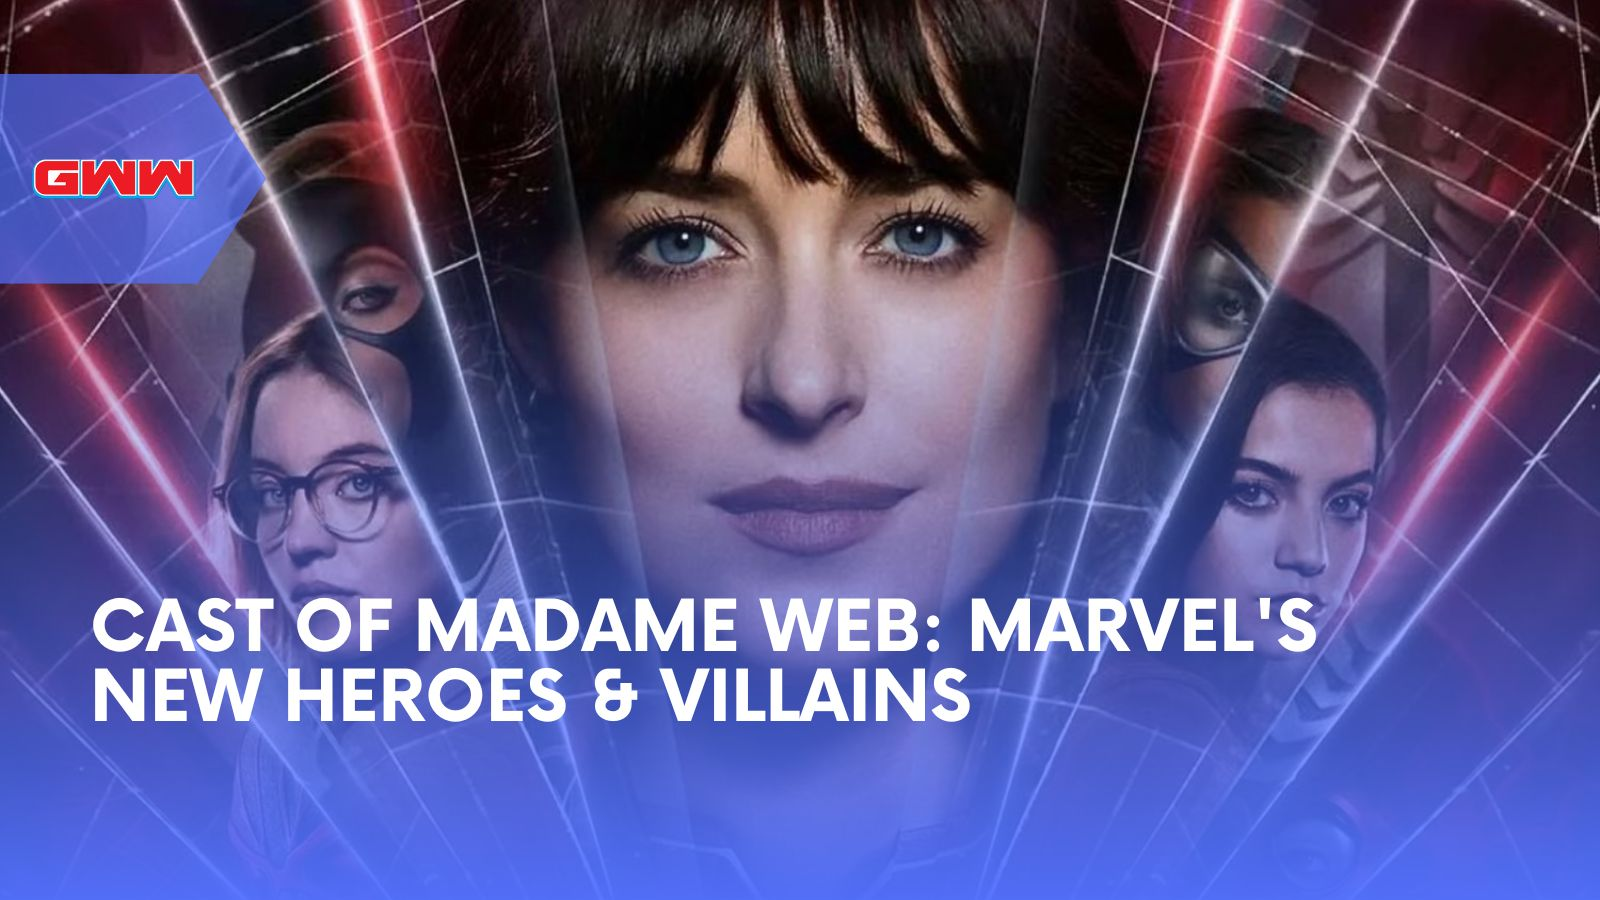 Cast of Madame Web: Marvel's New Heroes & Villains